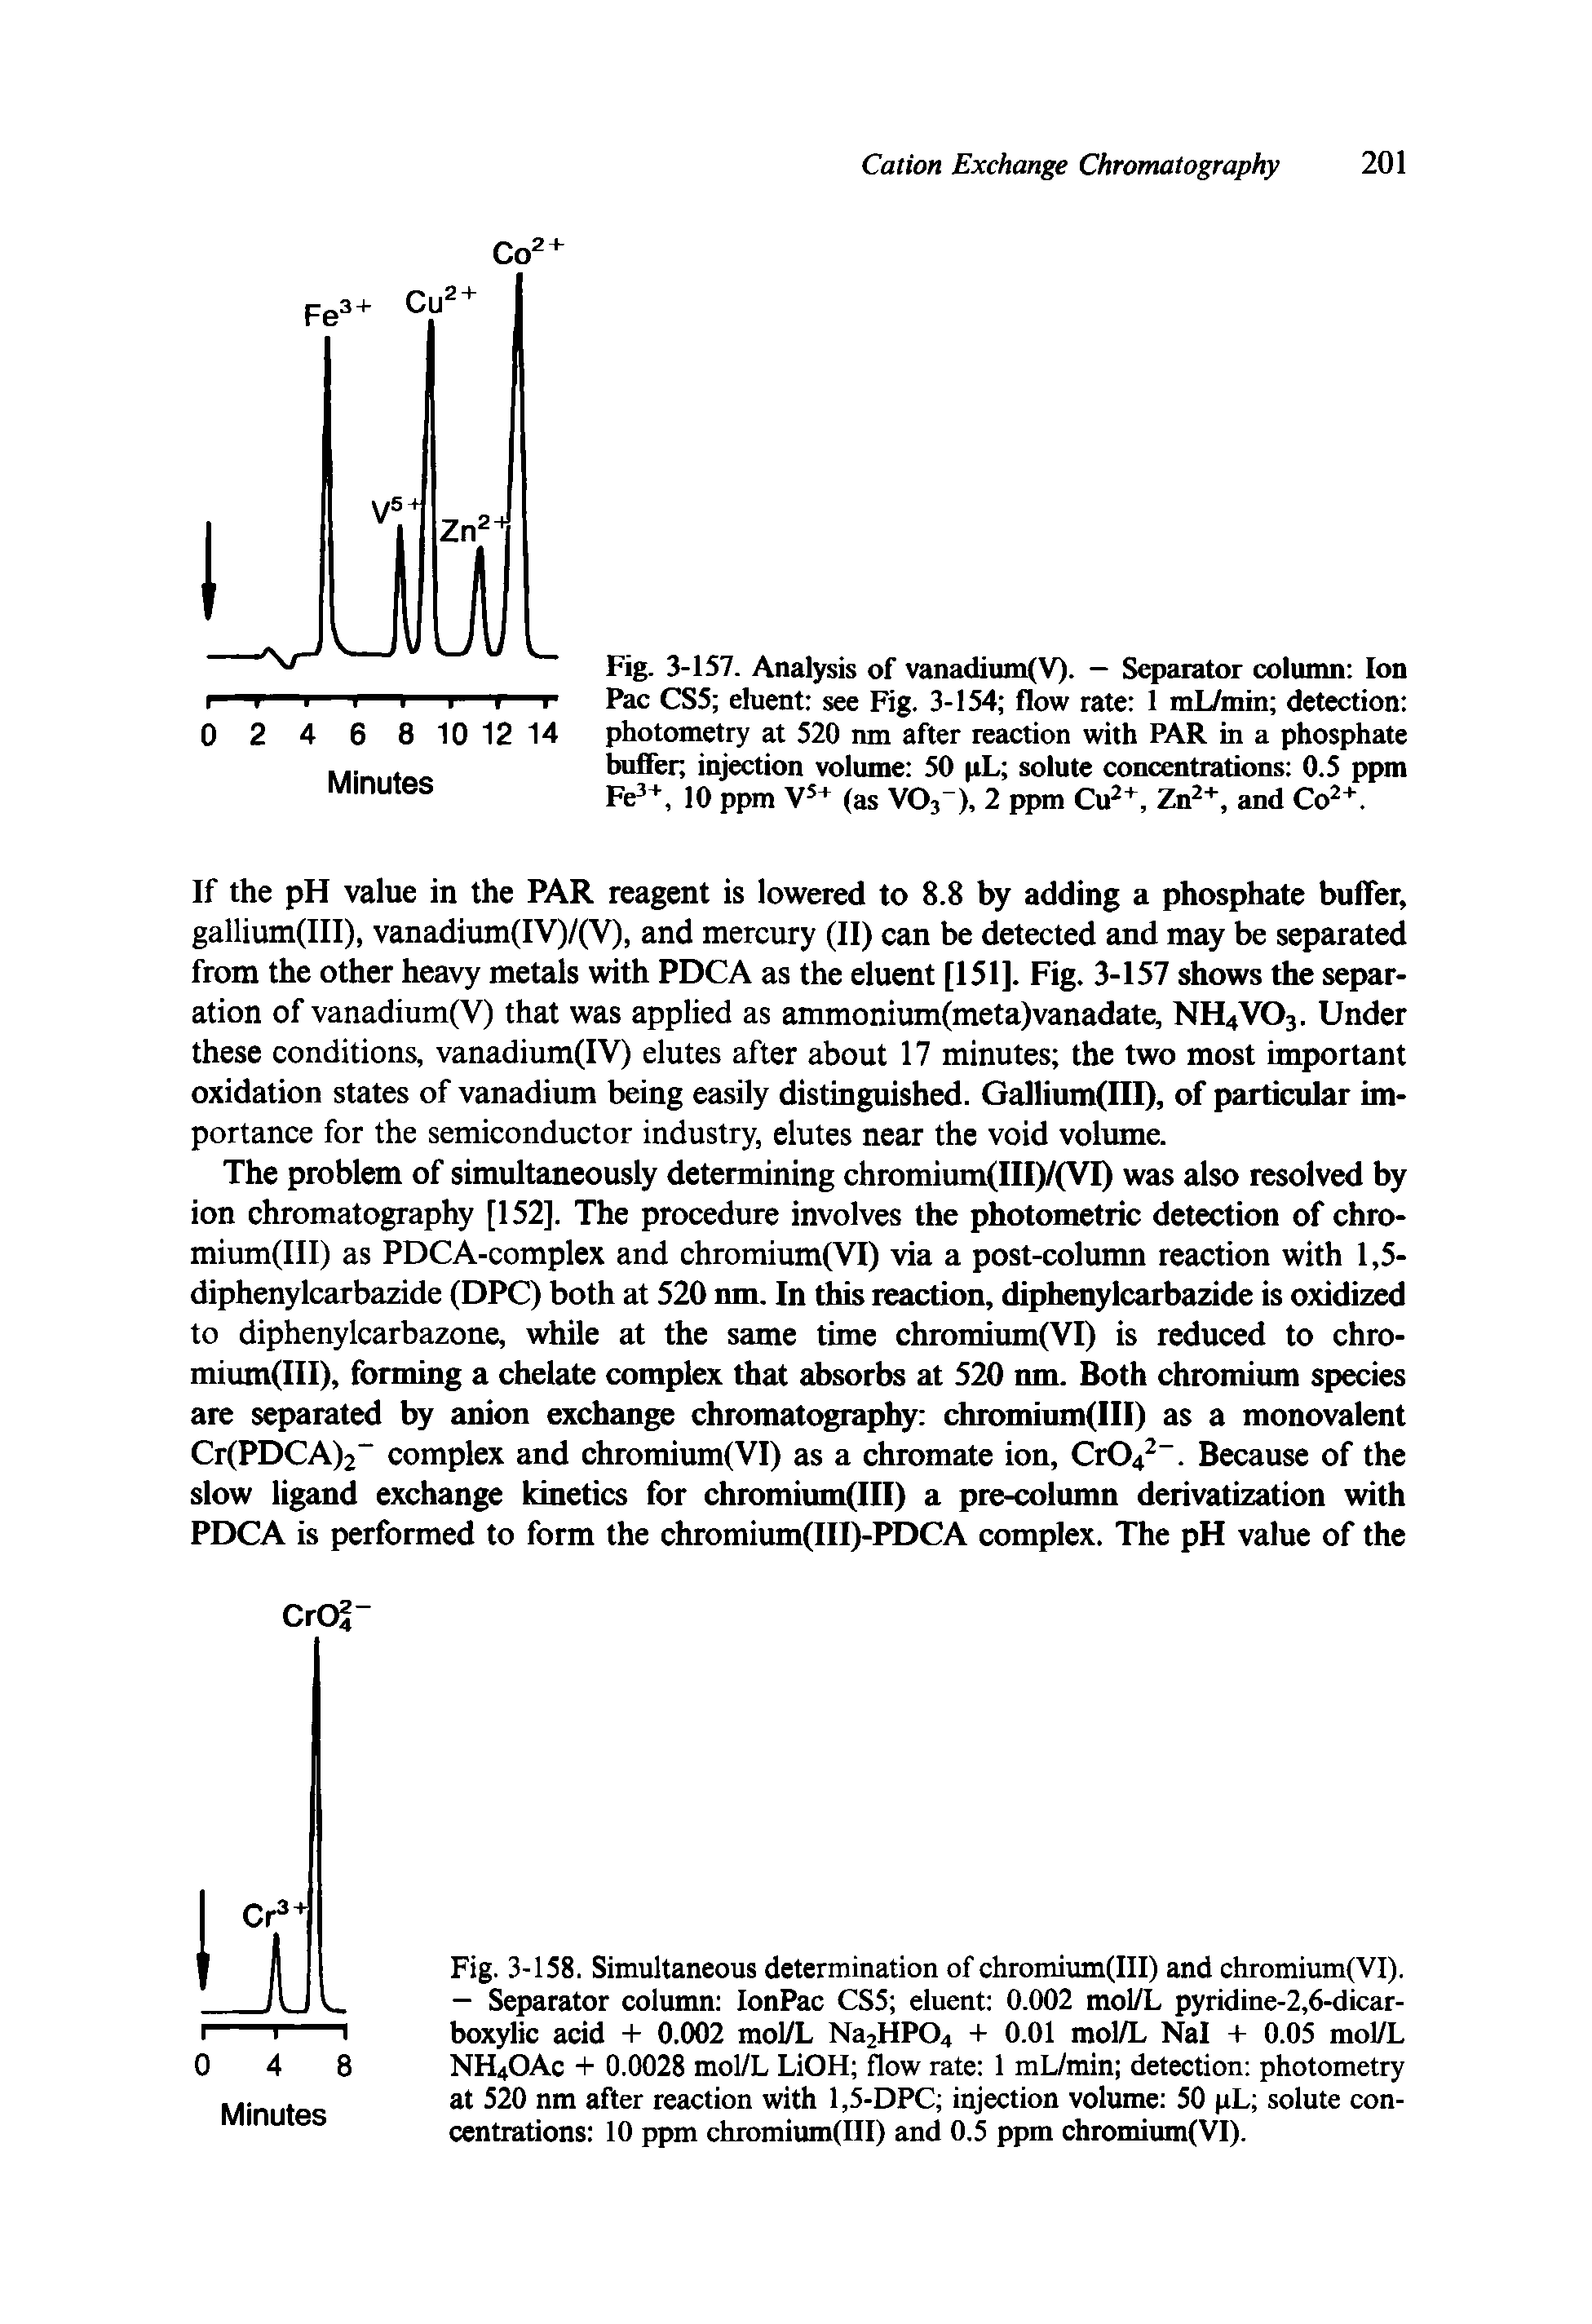 Fig. 3-158. Simultaneous determination of chromium(III) and chromium(VI). — Separator column IonPac CS5 eluent 0.002 mol/L pyridine-2,6-dicar-boxylic acid + 0.002 mol/L Na2HP04 + 0.01 mol/L Nal + 0.05 mol/L NH4OAc + 0.0028 mol/L LiOH flow rate 1 mL/min detection photometry at 520 nm after reaction with 1,5-DPC injection volume 50 pL solute concentrations 10 ppm chromium(III) and 0.5 ppm chromium(VI).